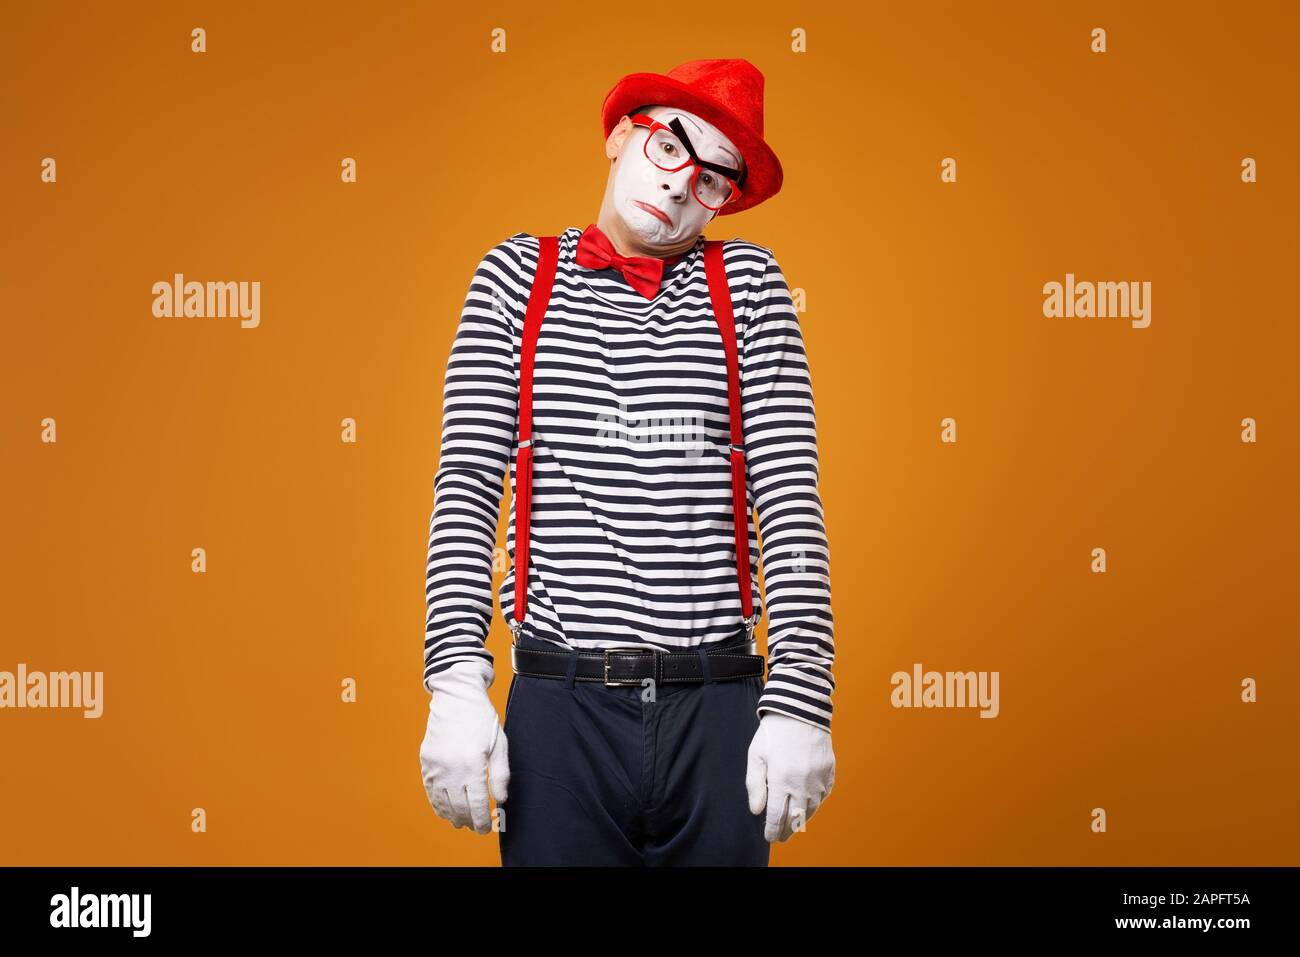 Sad mime in vest and red hat Isolated on orange background Stock Photo